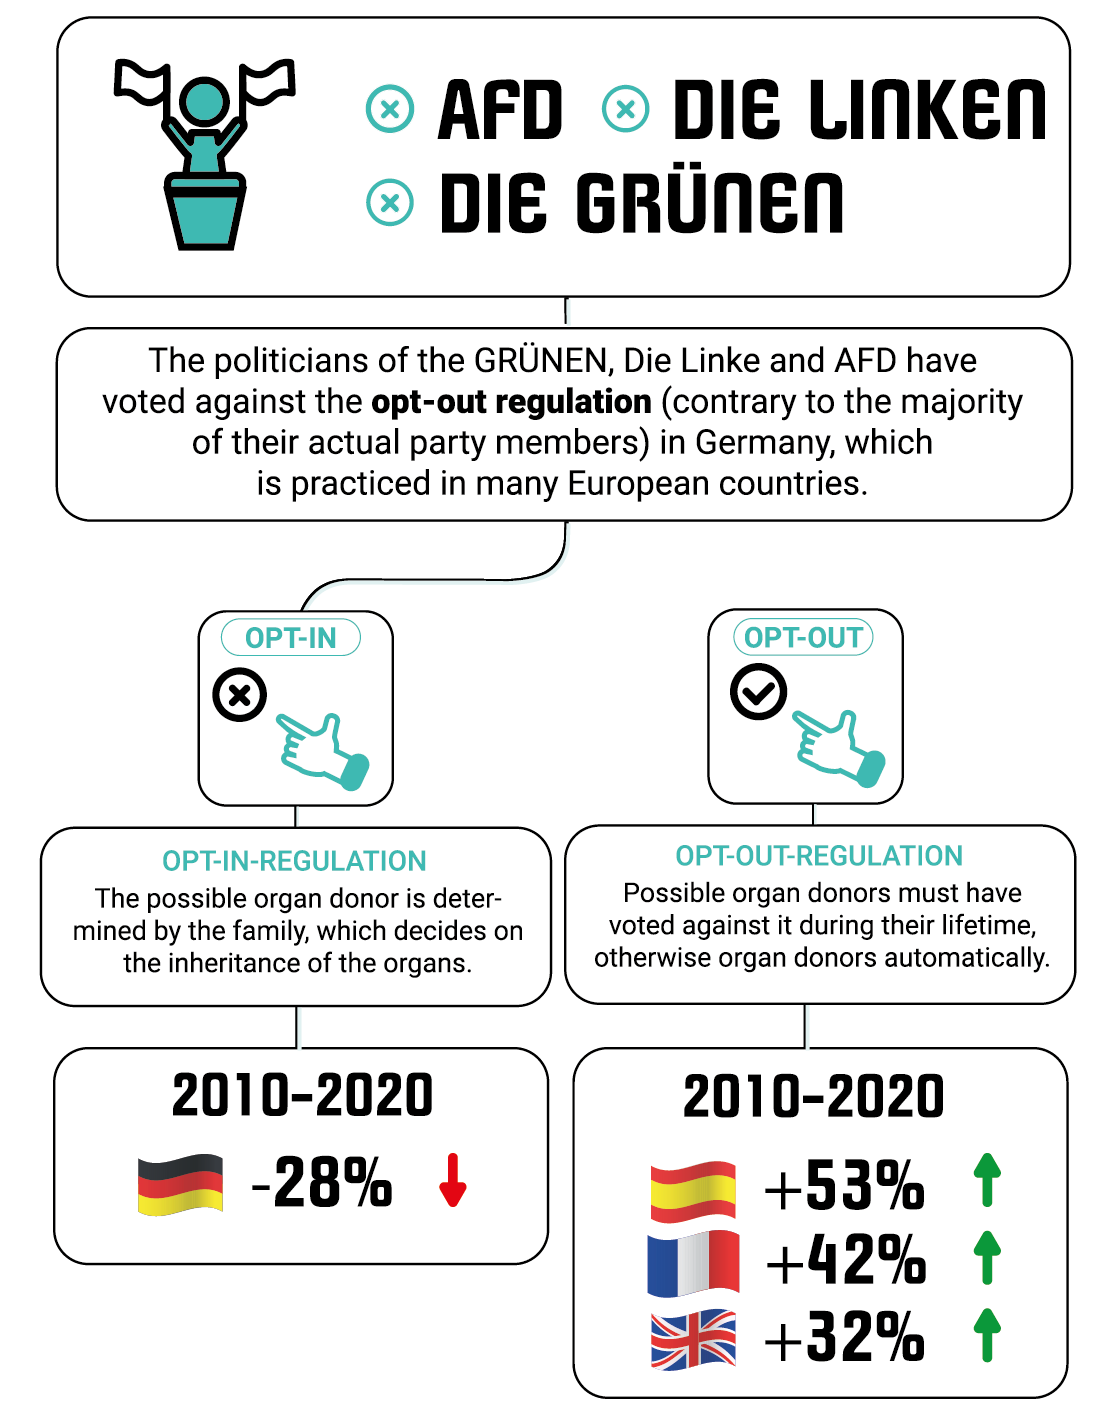 Politician of Dıe Grünen/Bündnis90, Die Linken and the AFD have voted against OPT-OUT-Regulation (against the majority of their actual party members), which is practiced in many European countries.